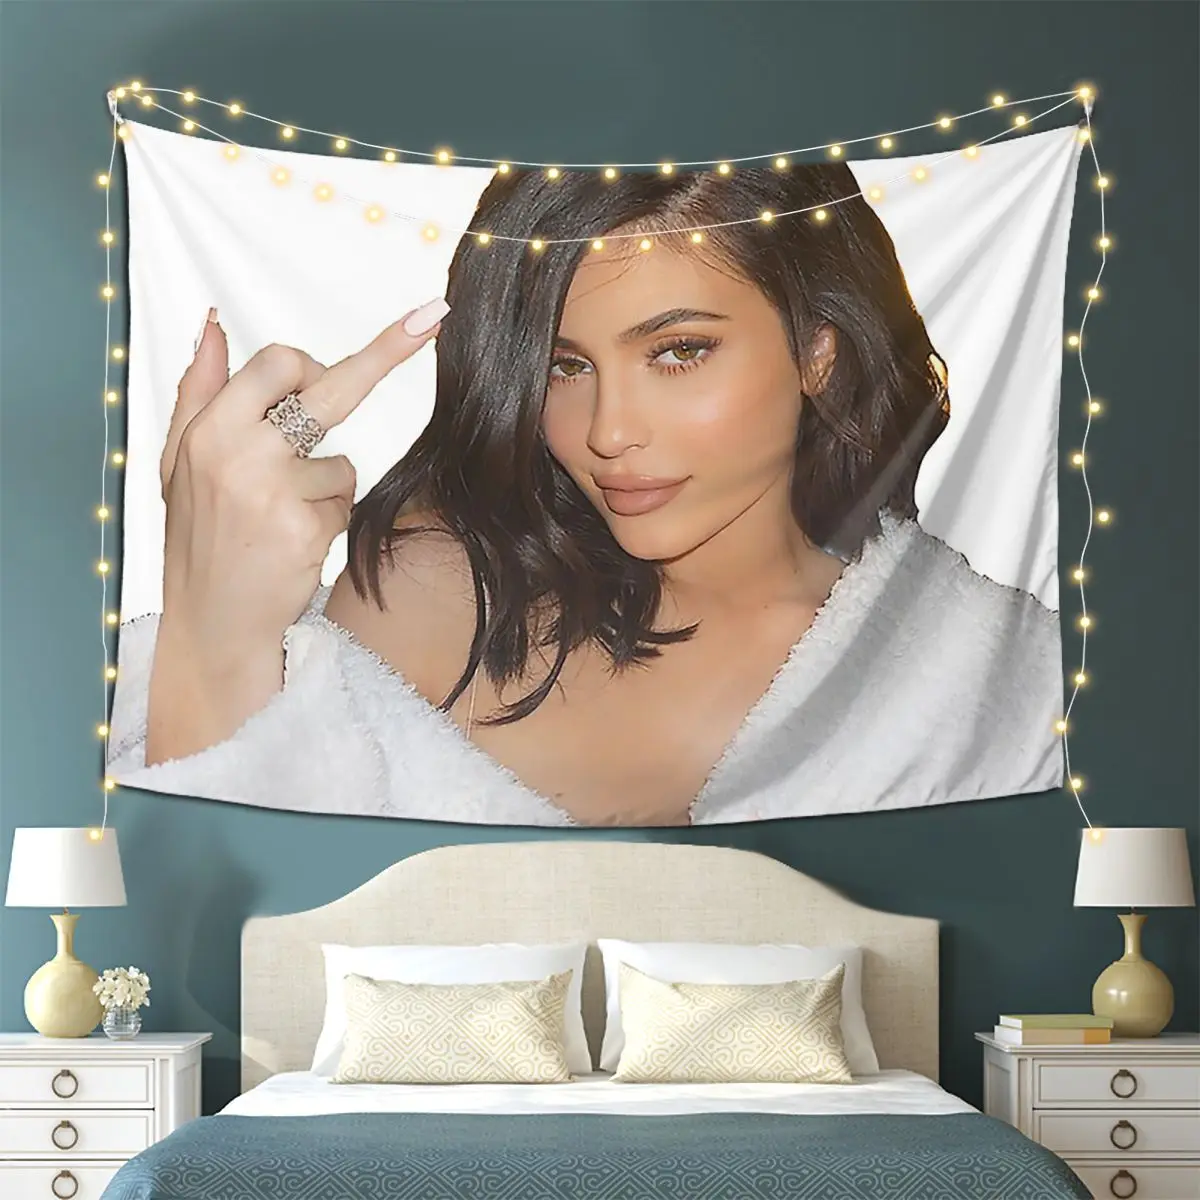 

Kylie Jenner Tapestry Decoration Art Aesthetic Tapestries for Living Room Bedroom Decor Home Funny Wall Cloth Wall Hanging